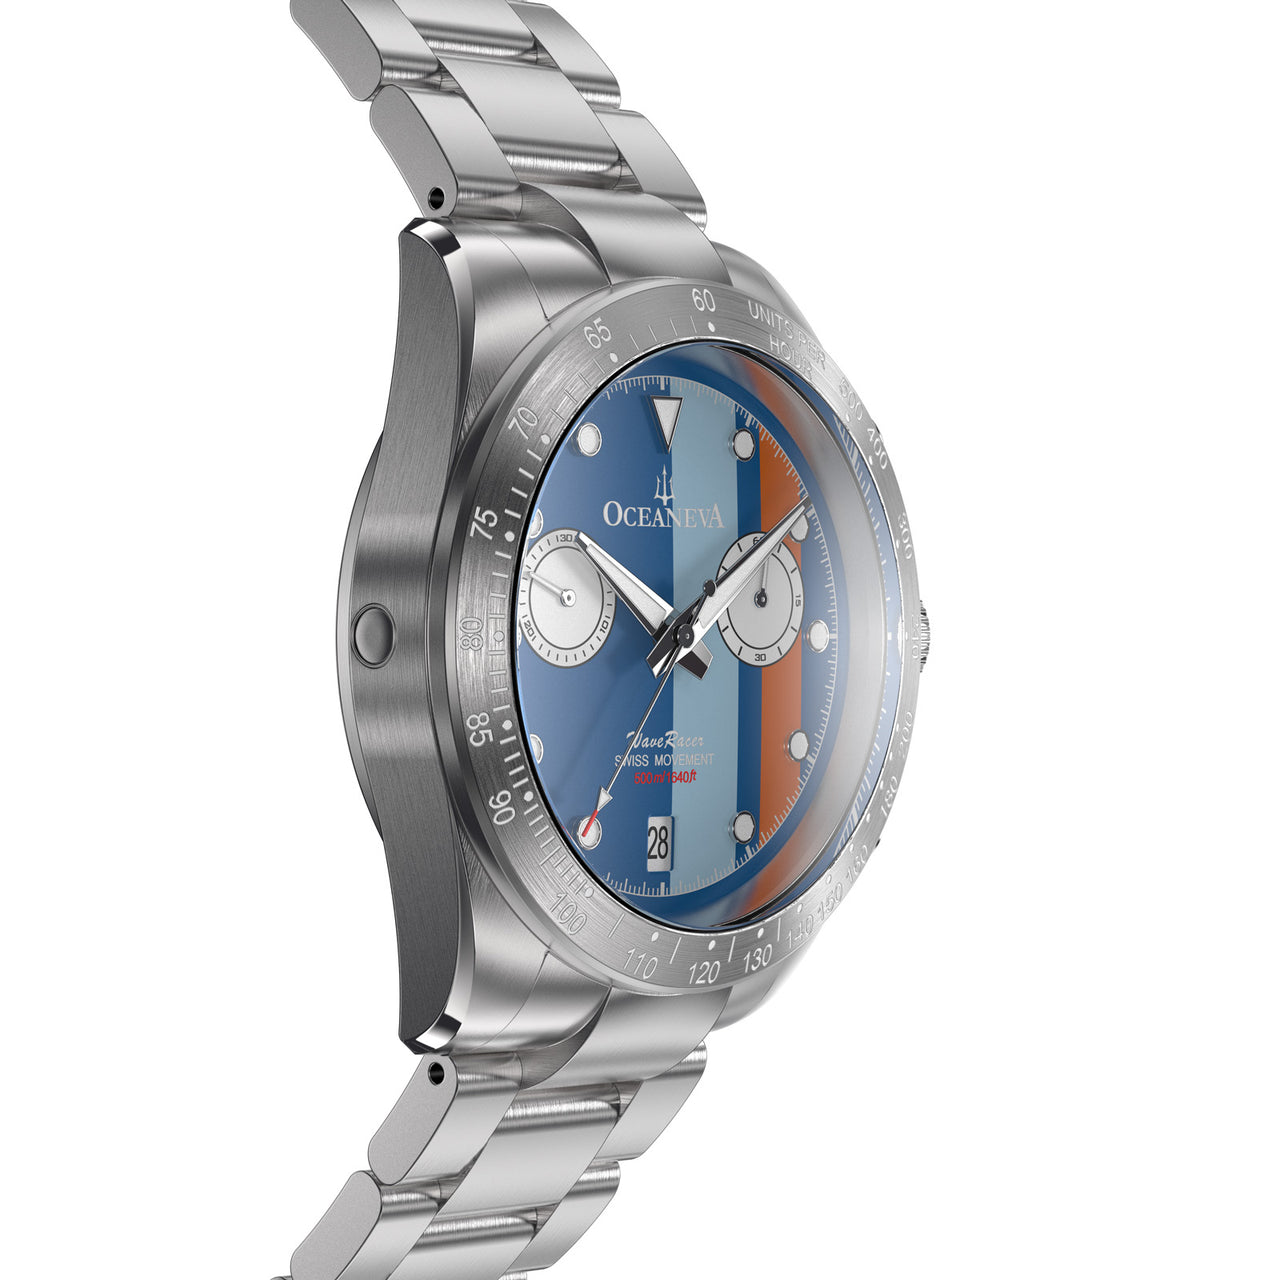 Oceaneva Blue Striped Chronograph Watch Side View